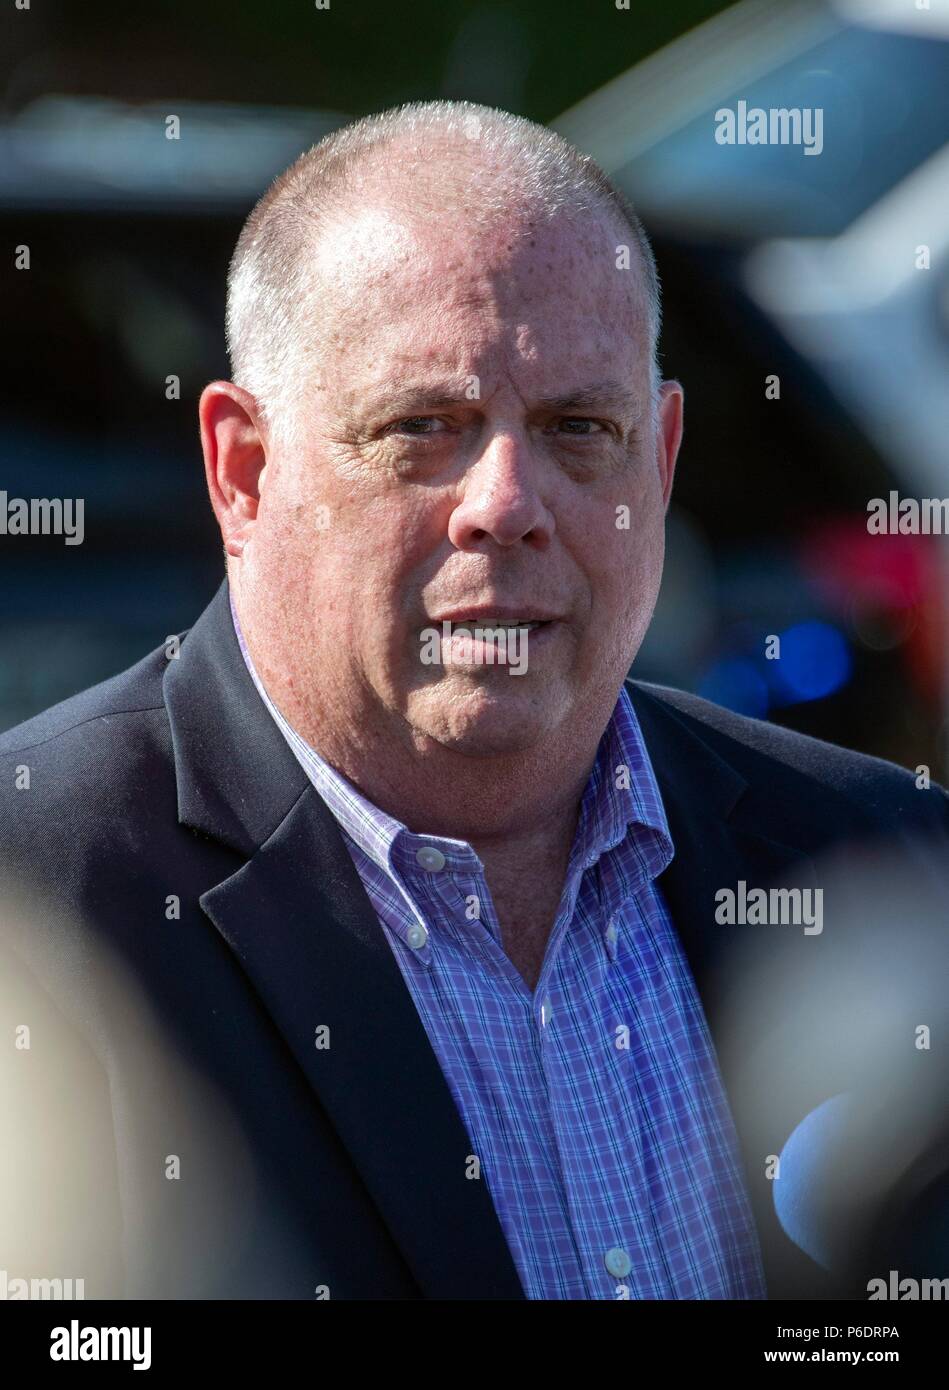 Governor Larry Hogan (Republican of Maryland) speaks to reporters after a gunman opened fire the Capital Gazette newspaper killing five people and injuring many others on Thursday, June 28, 2018. Credit: Ron Sachs / CNP (RESTRICTION: NO New York or New Jersey Newspapers or newspapers within a 75 mile radius of New York City) | usage worldwide Stock Photo